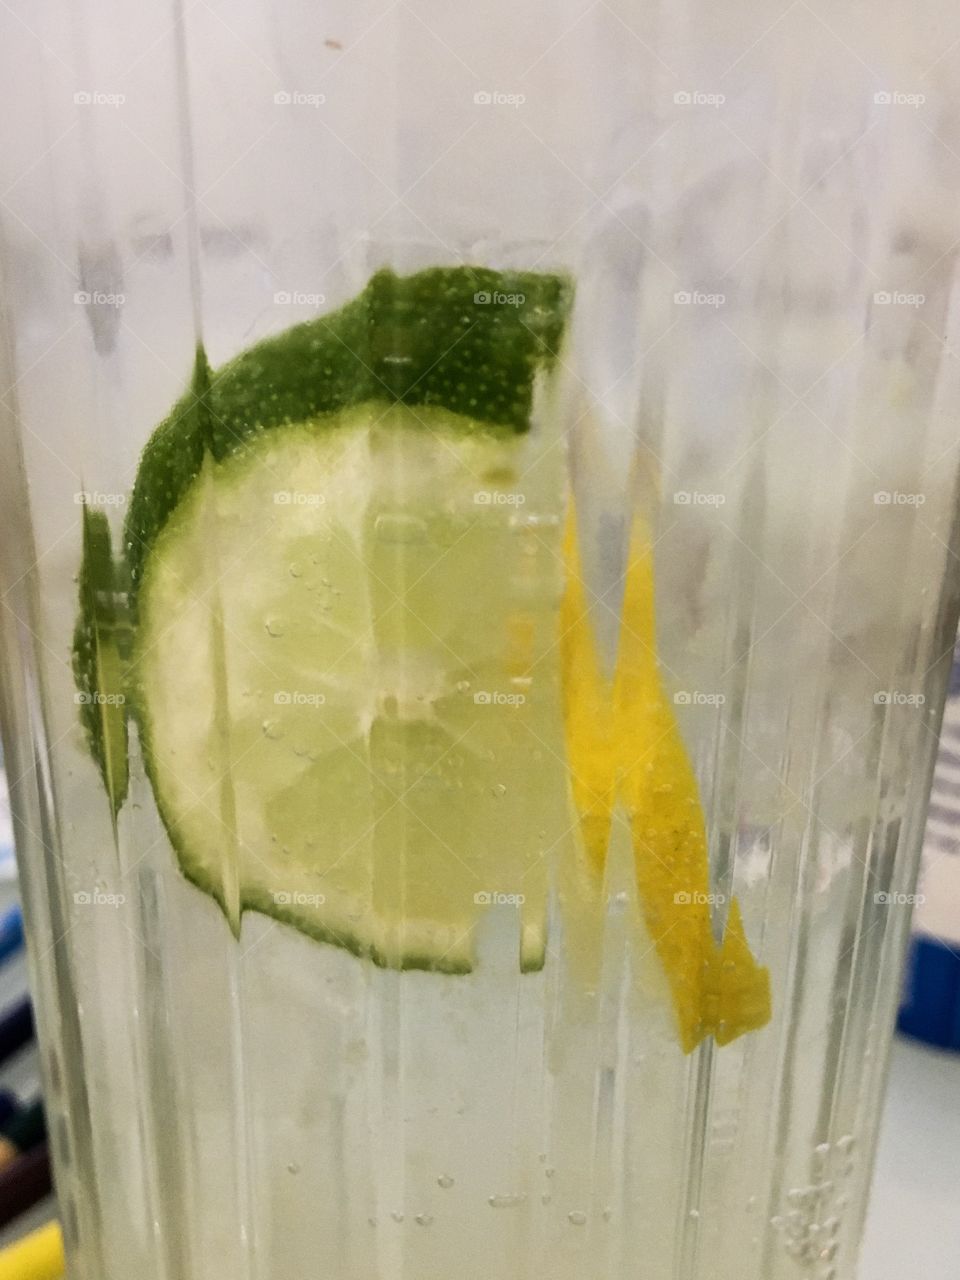 The slice of lemon and lime in the glass of lemonade. Cold beverages background.